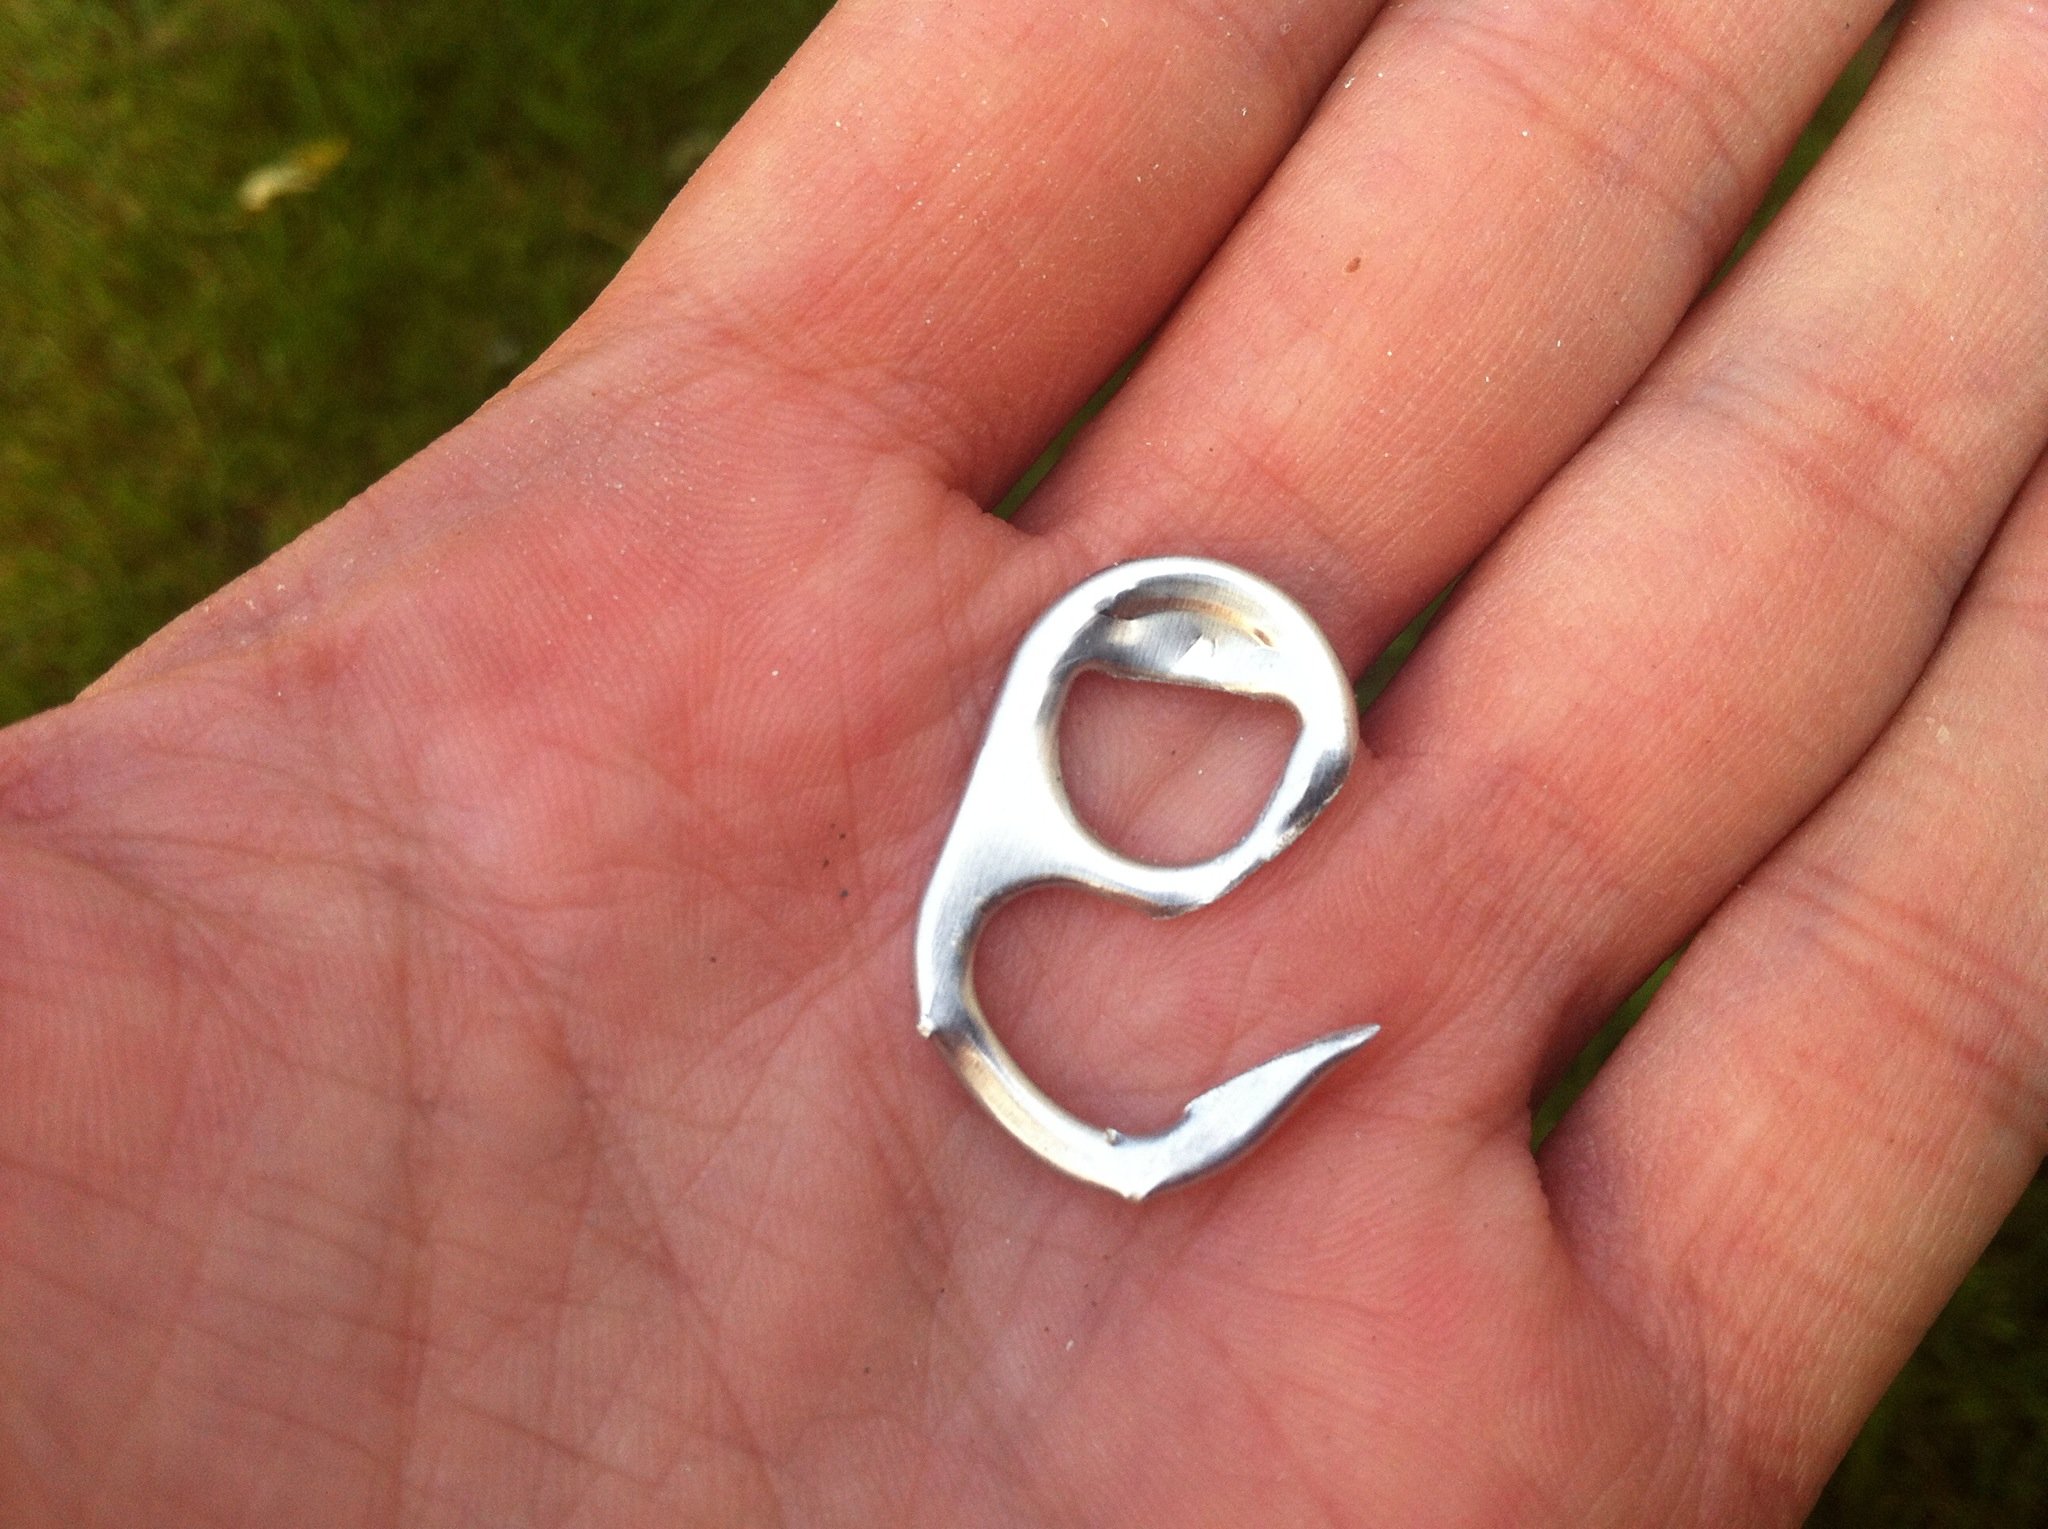 Turn a Can Tab Into a Survival Fish Hook : 3 Steps (with Pictures) -  Instructables